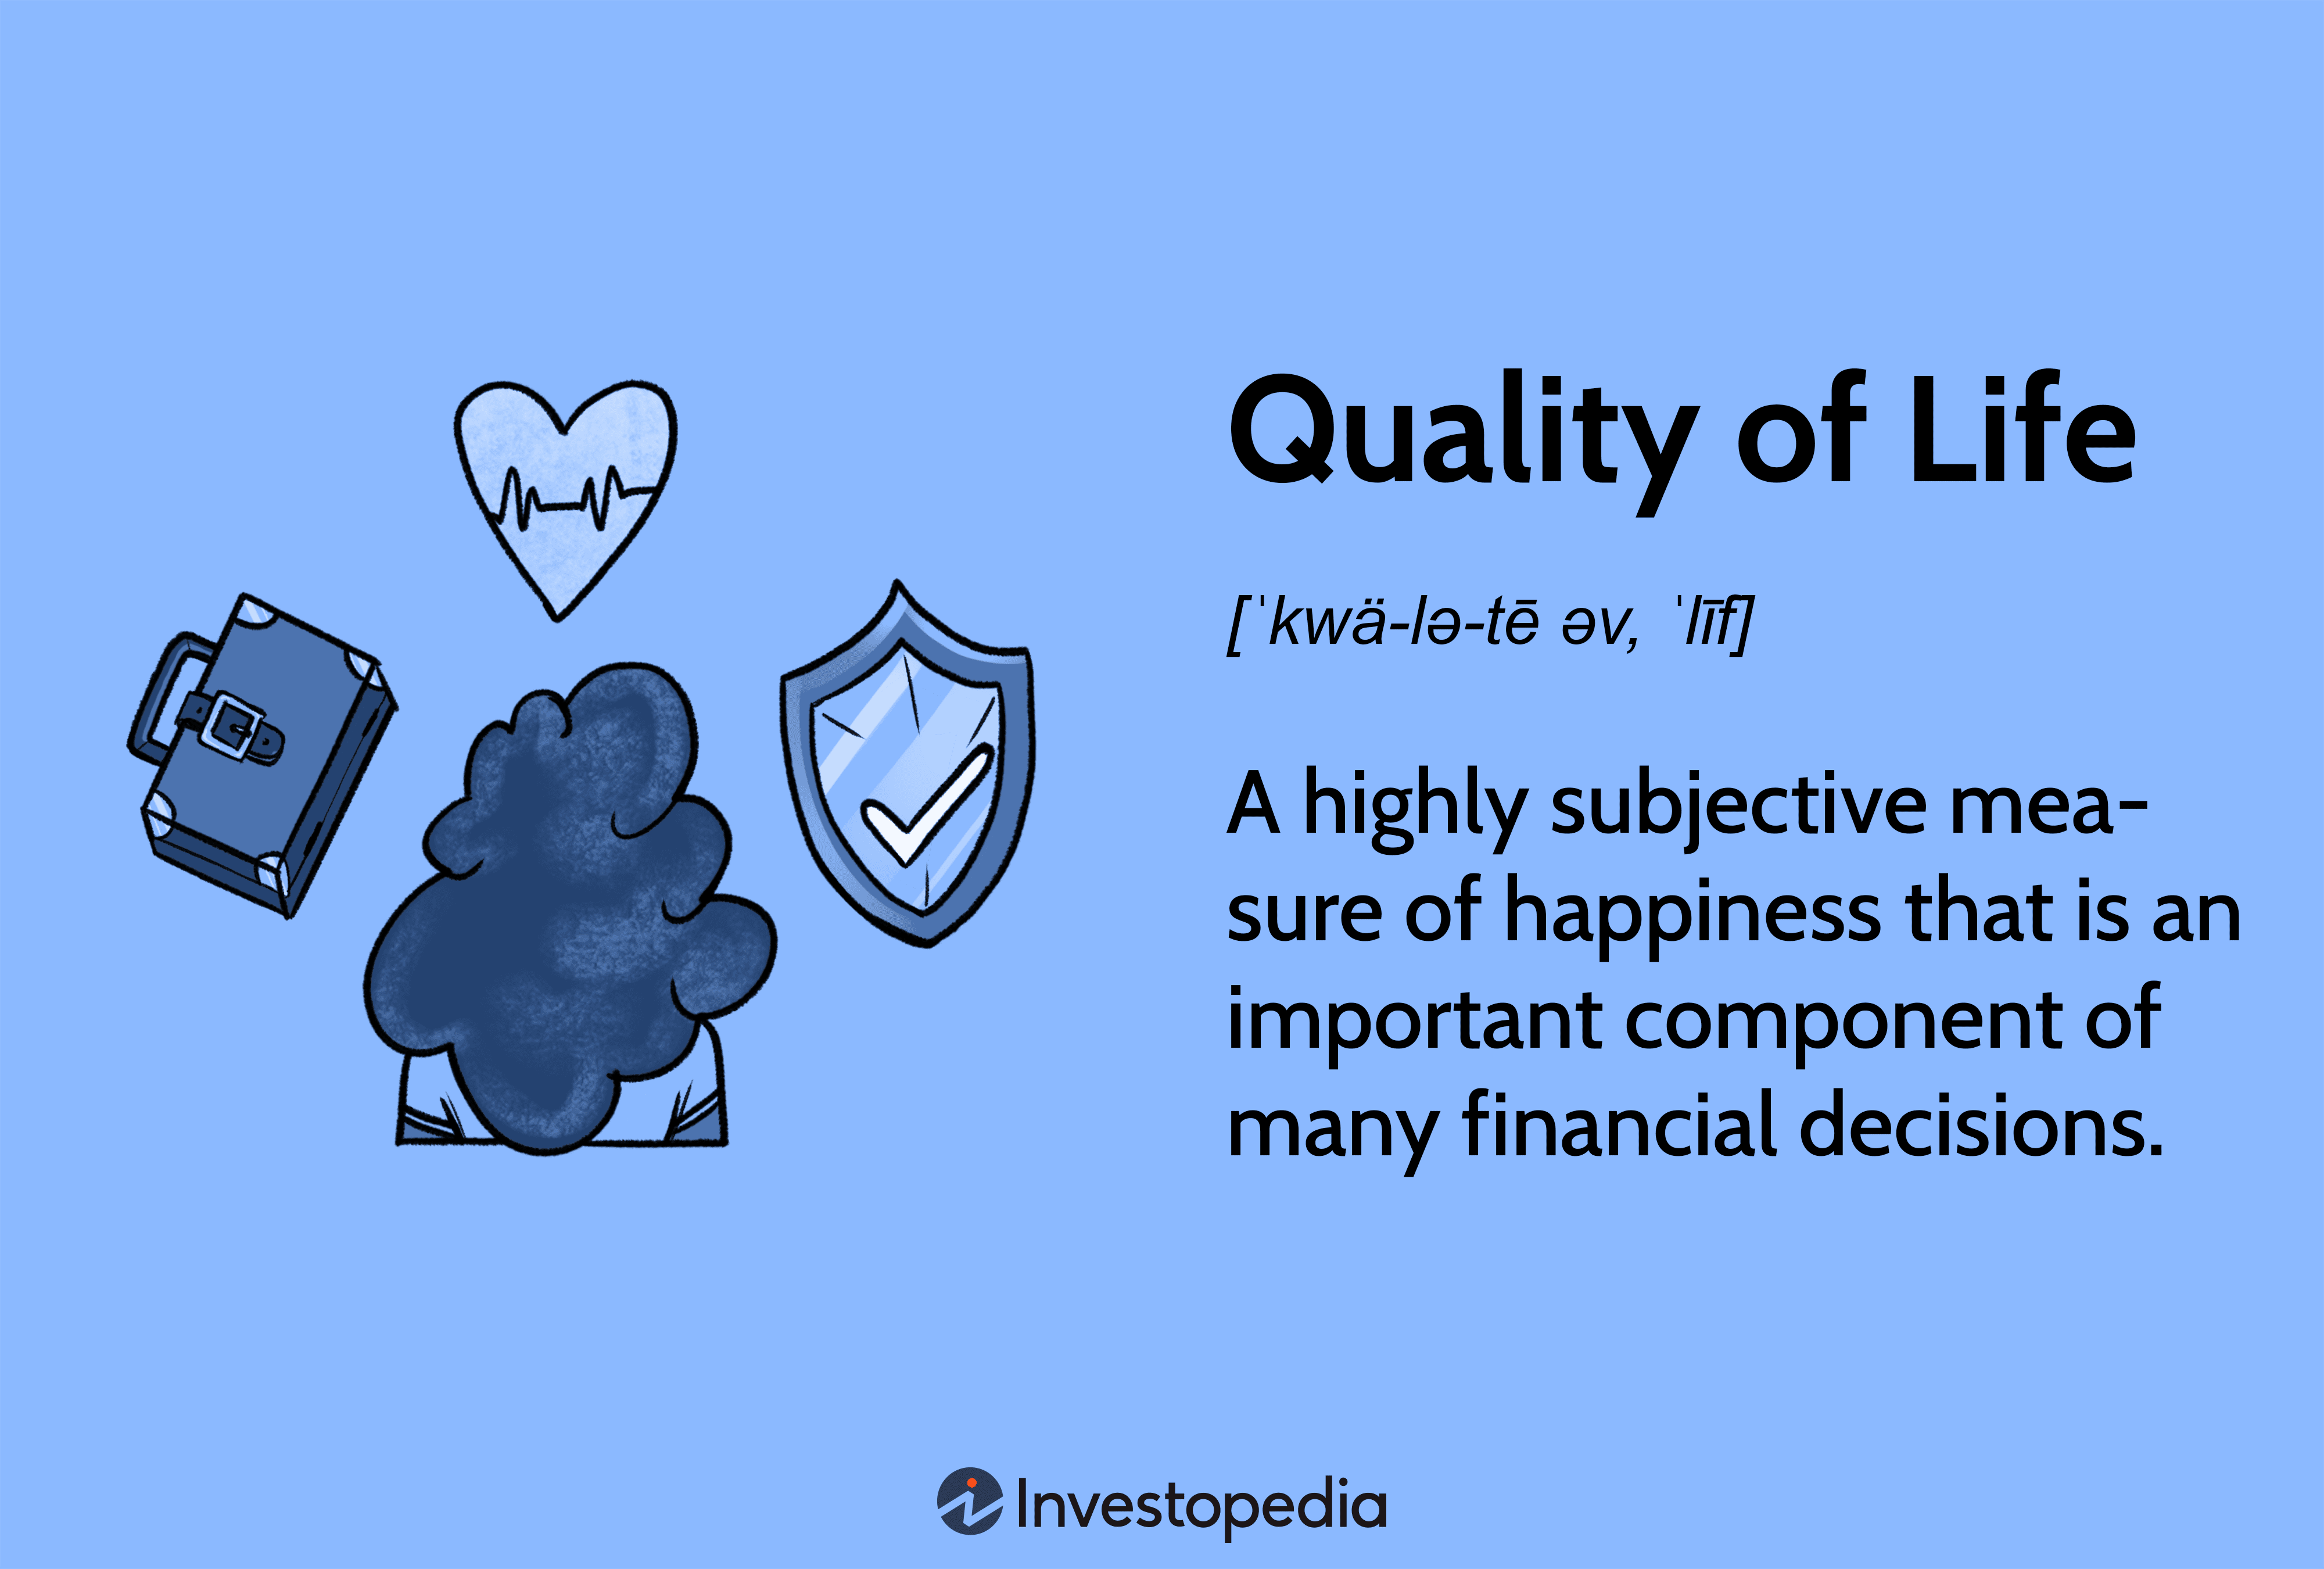 Quality of Life: A highly subjective measure of happiness that is an important component of many financial decisions.